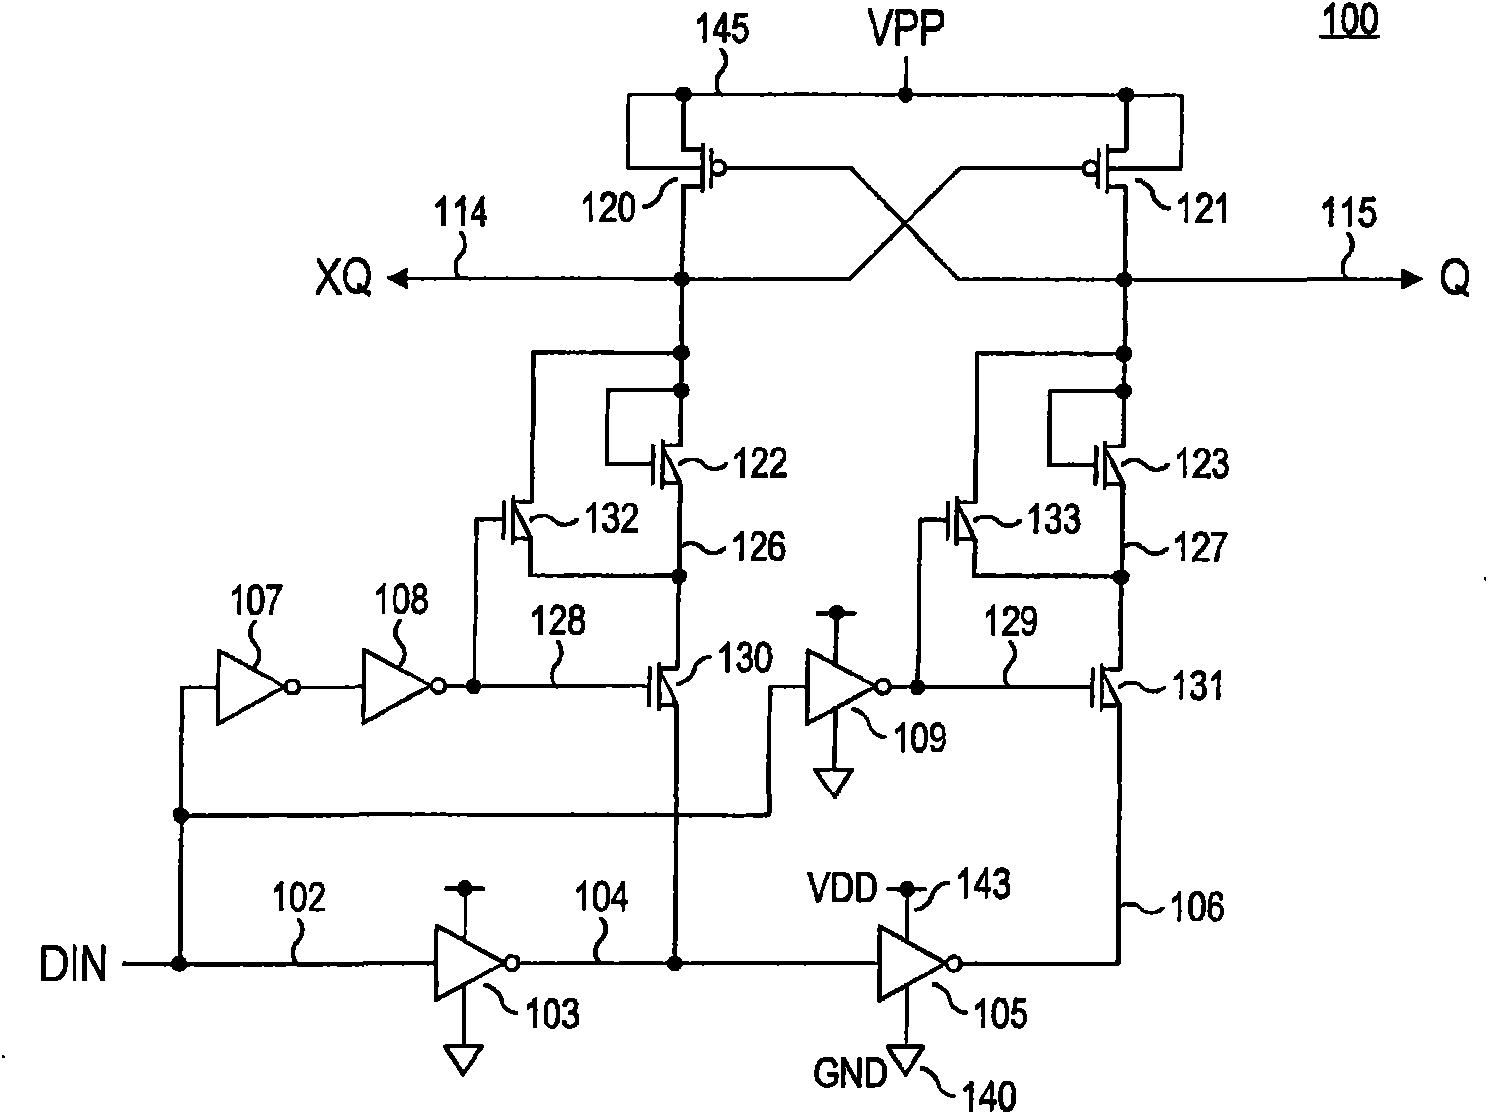 Level shifter circuit incorporating transistor snap-back protection